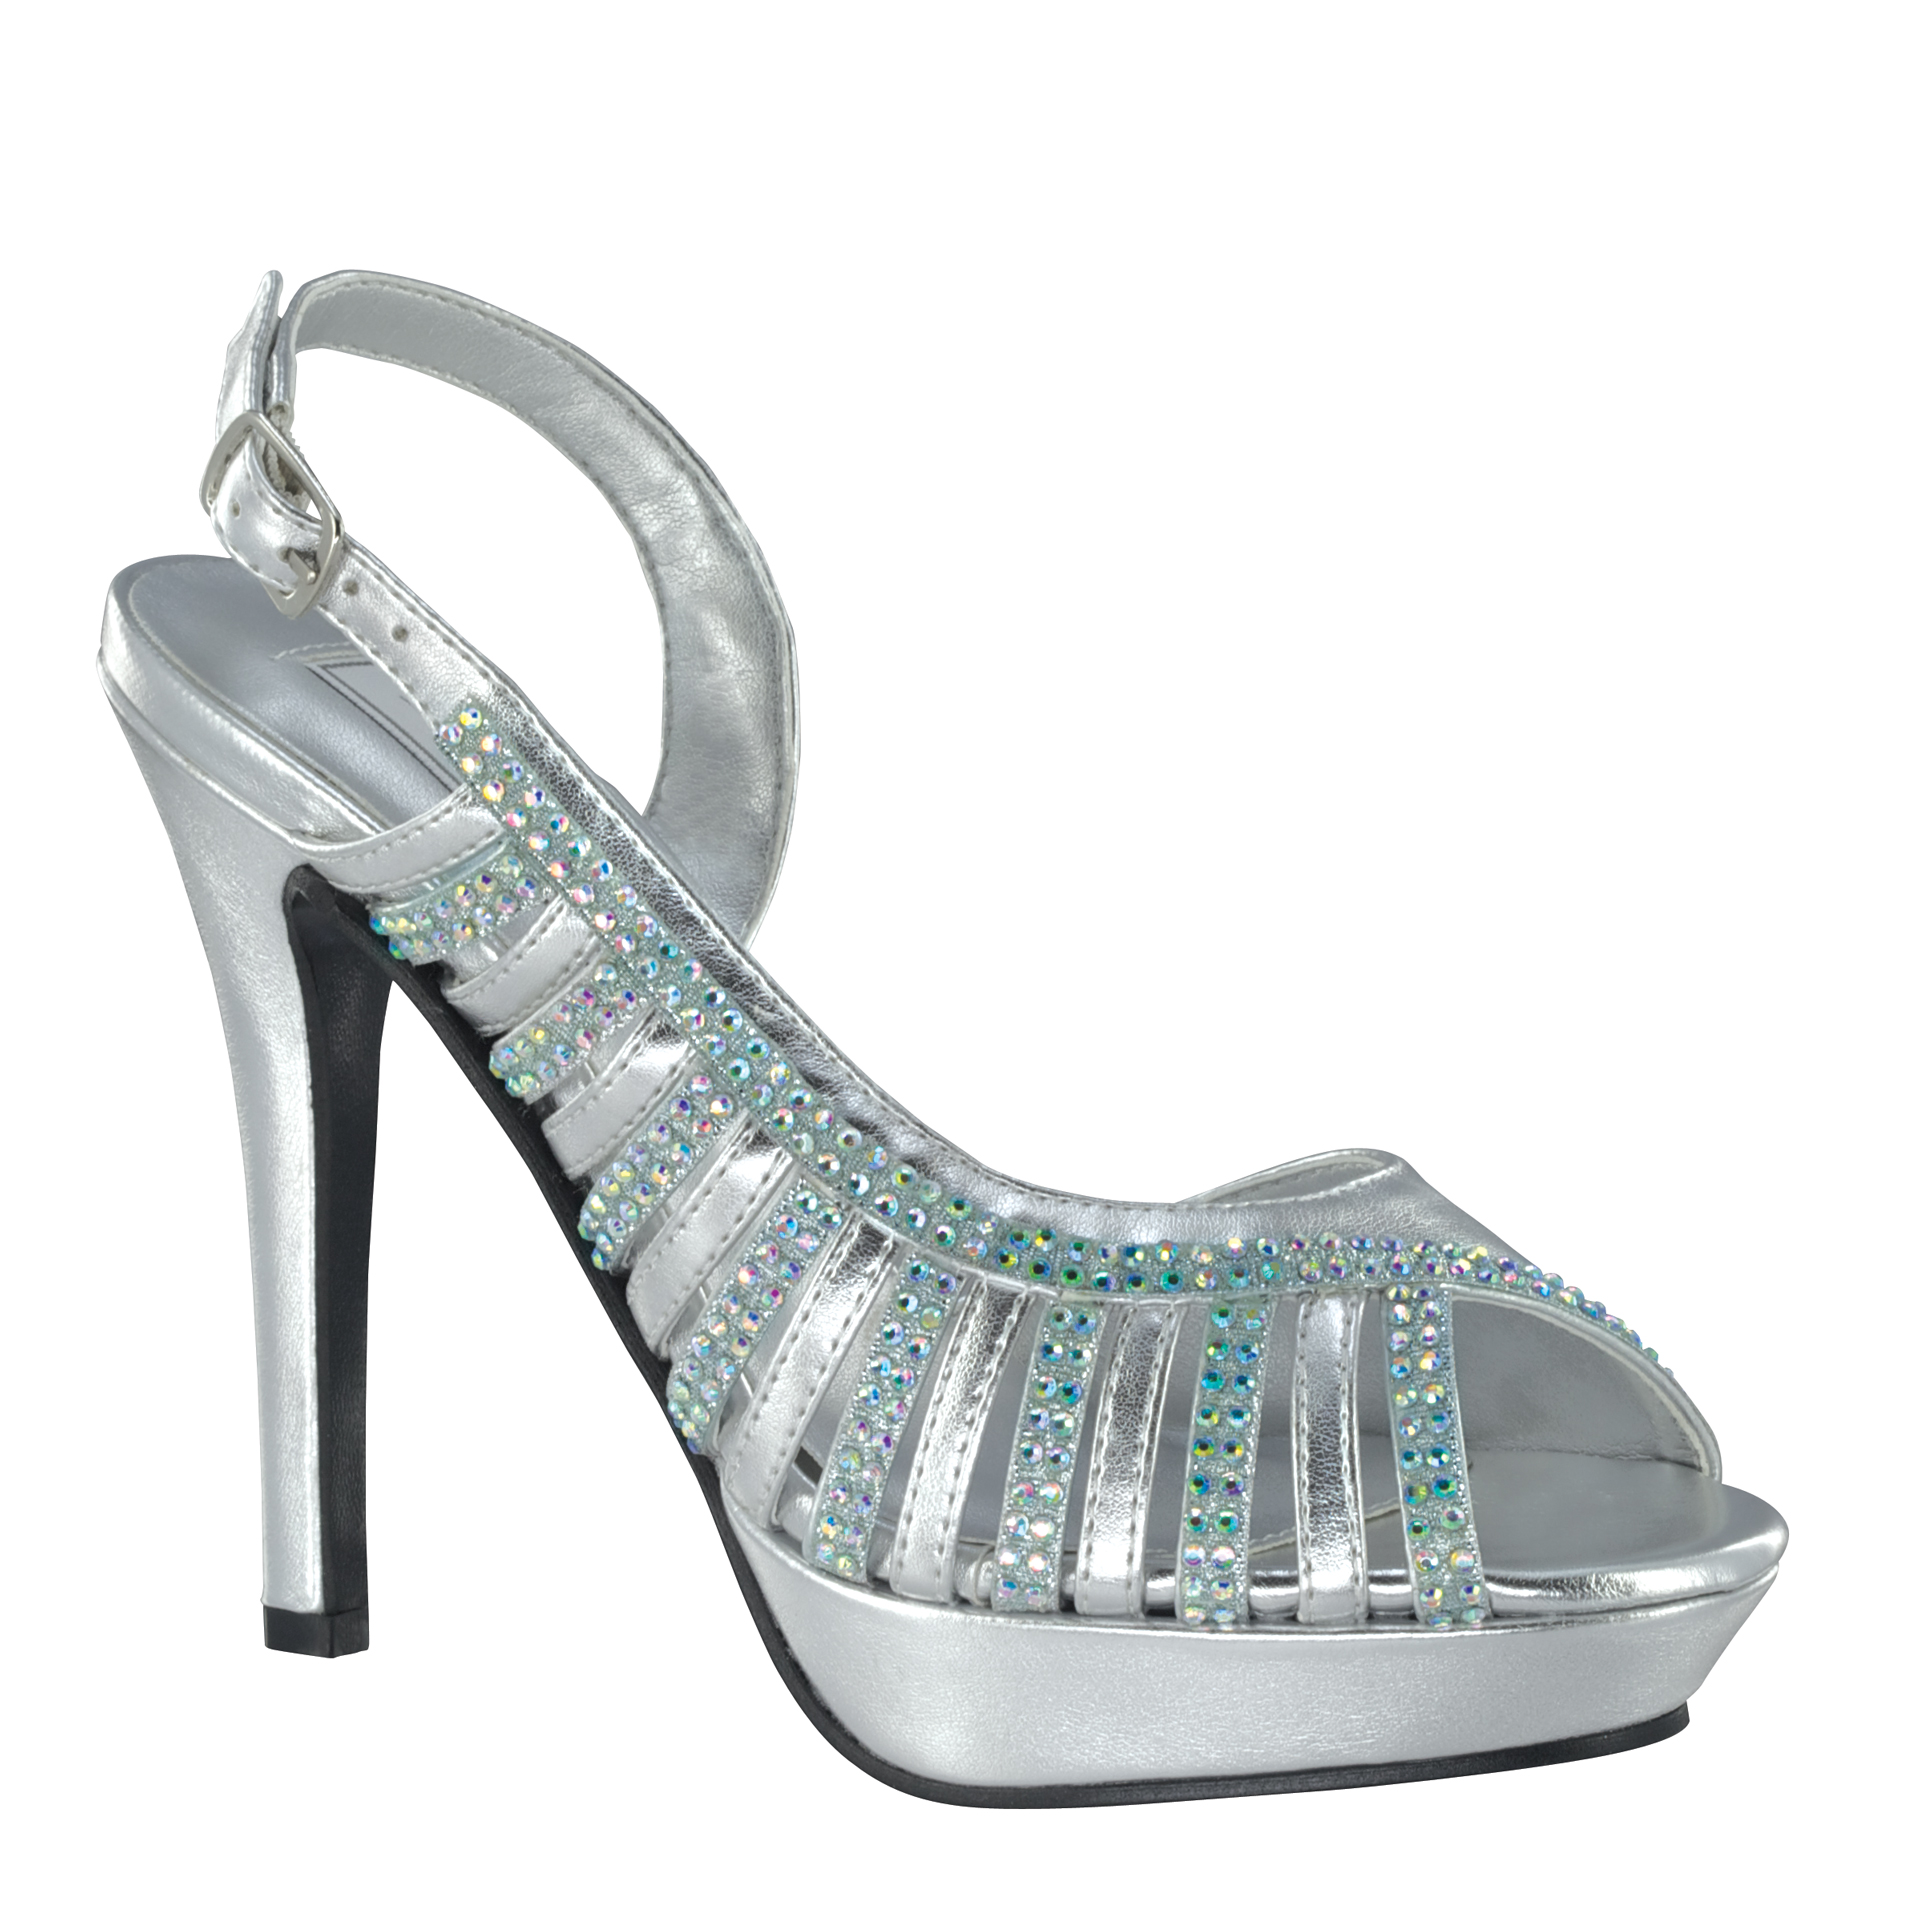 Touch Ups Women's Theresa Silver Sandal